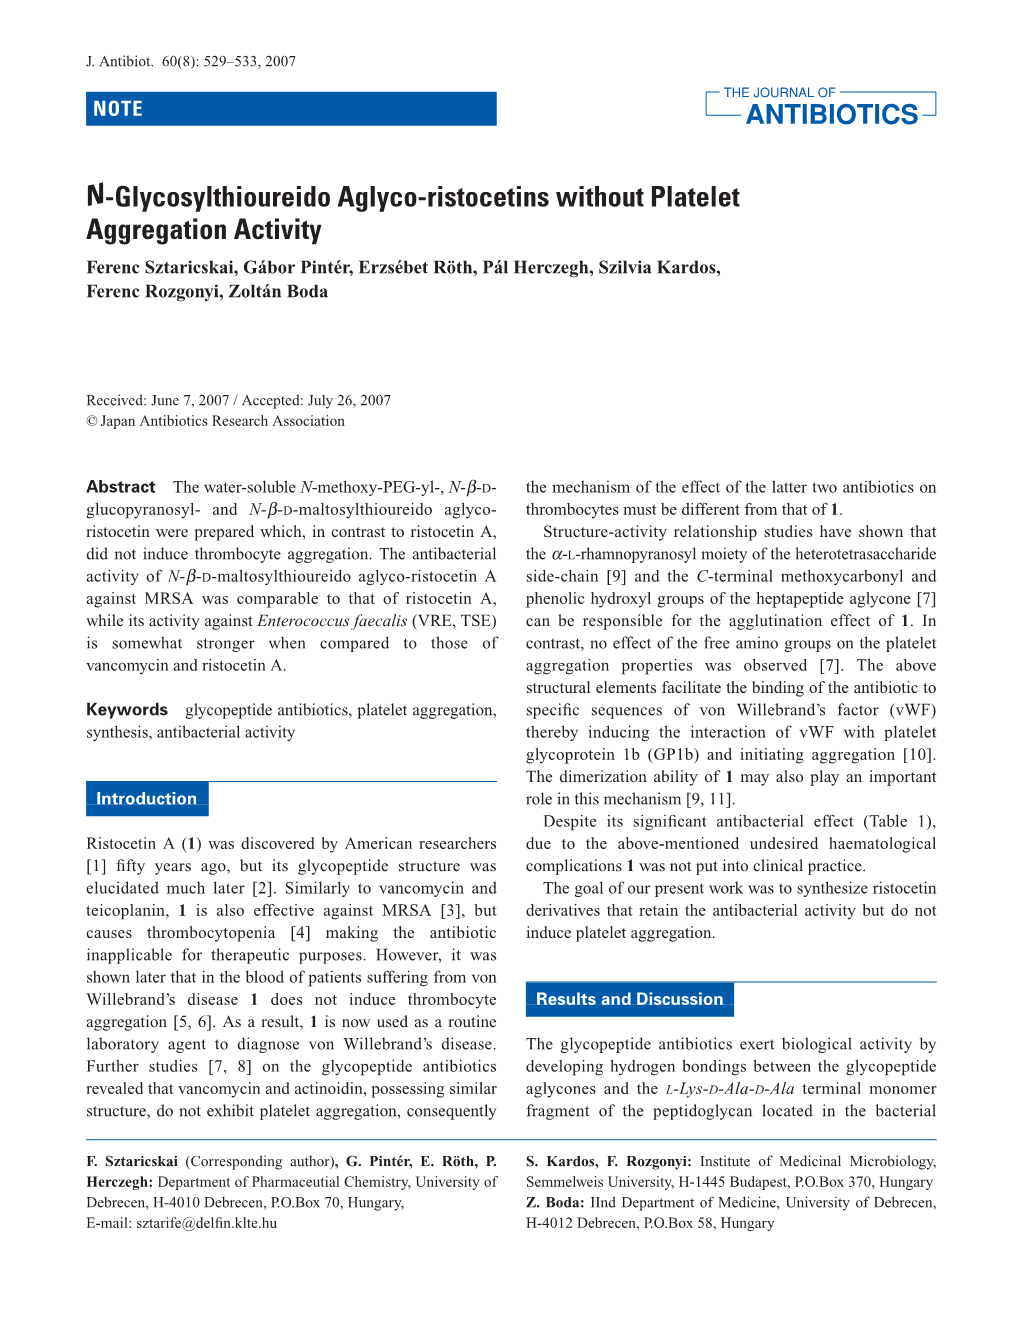 N-Glycosylthioureido Aglyco-Ristocetins Without Platelet